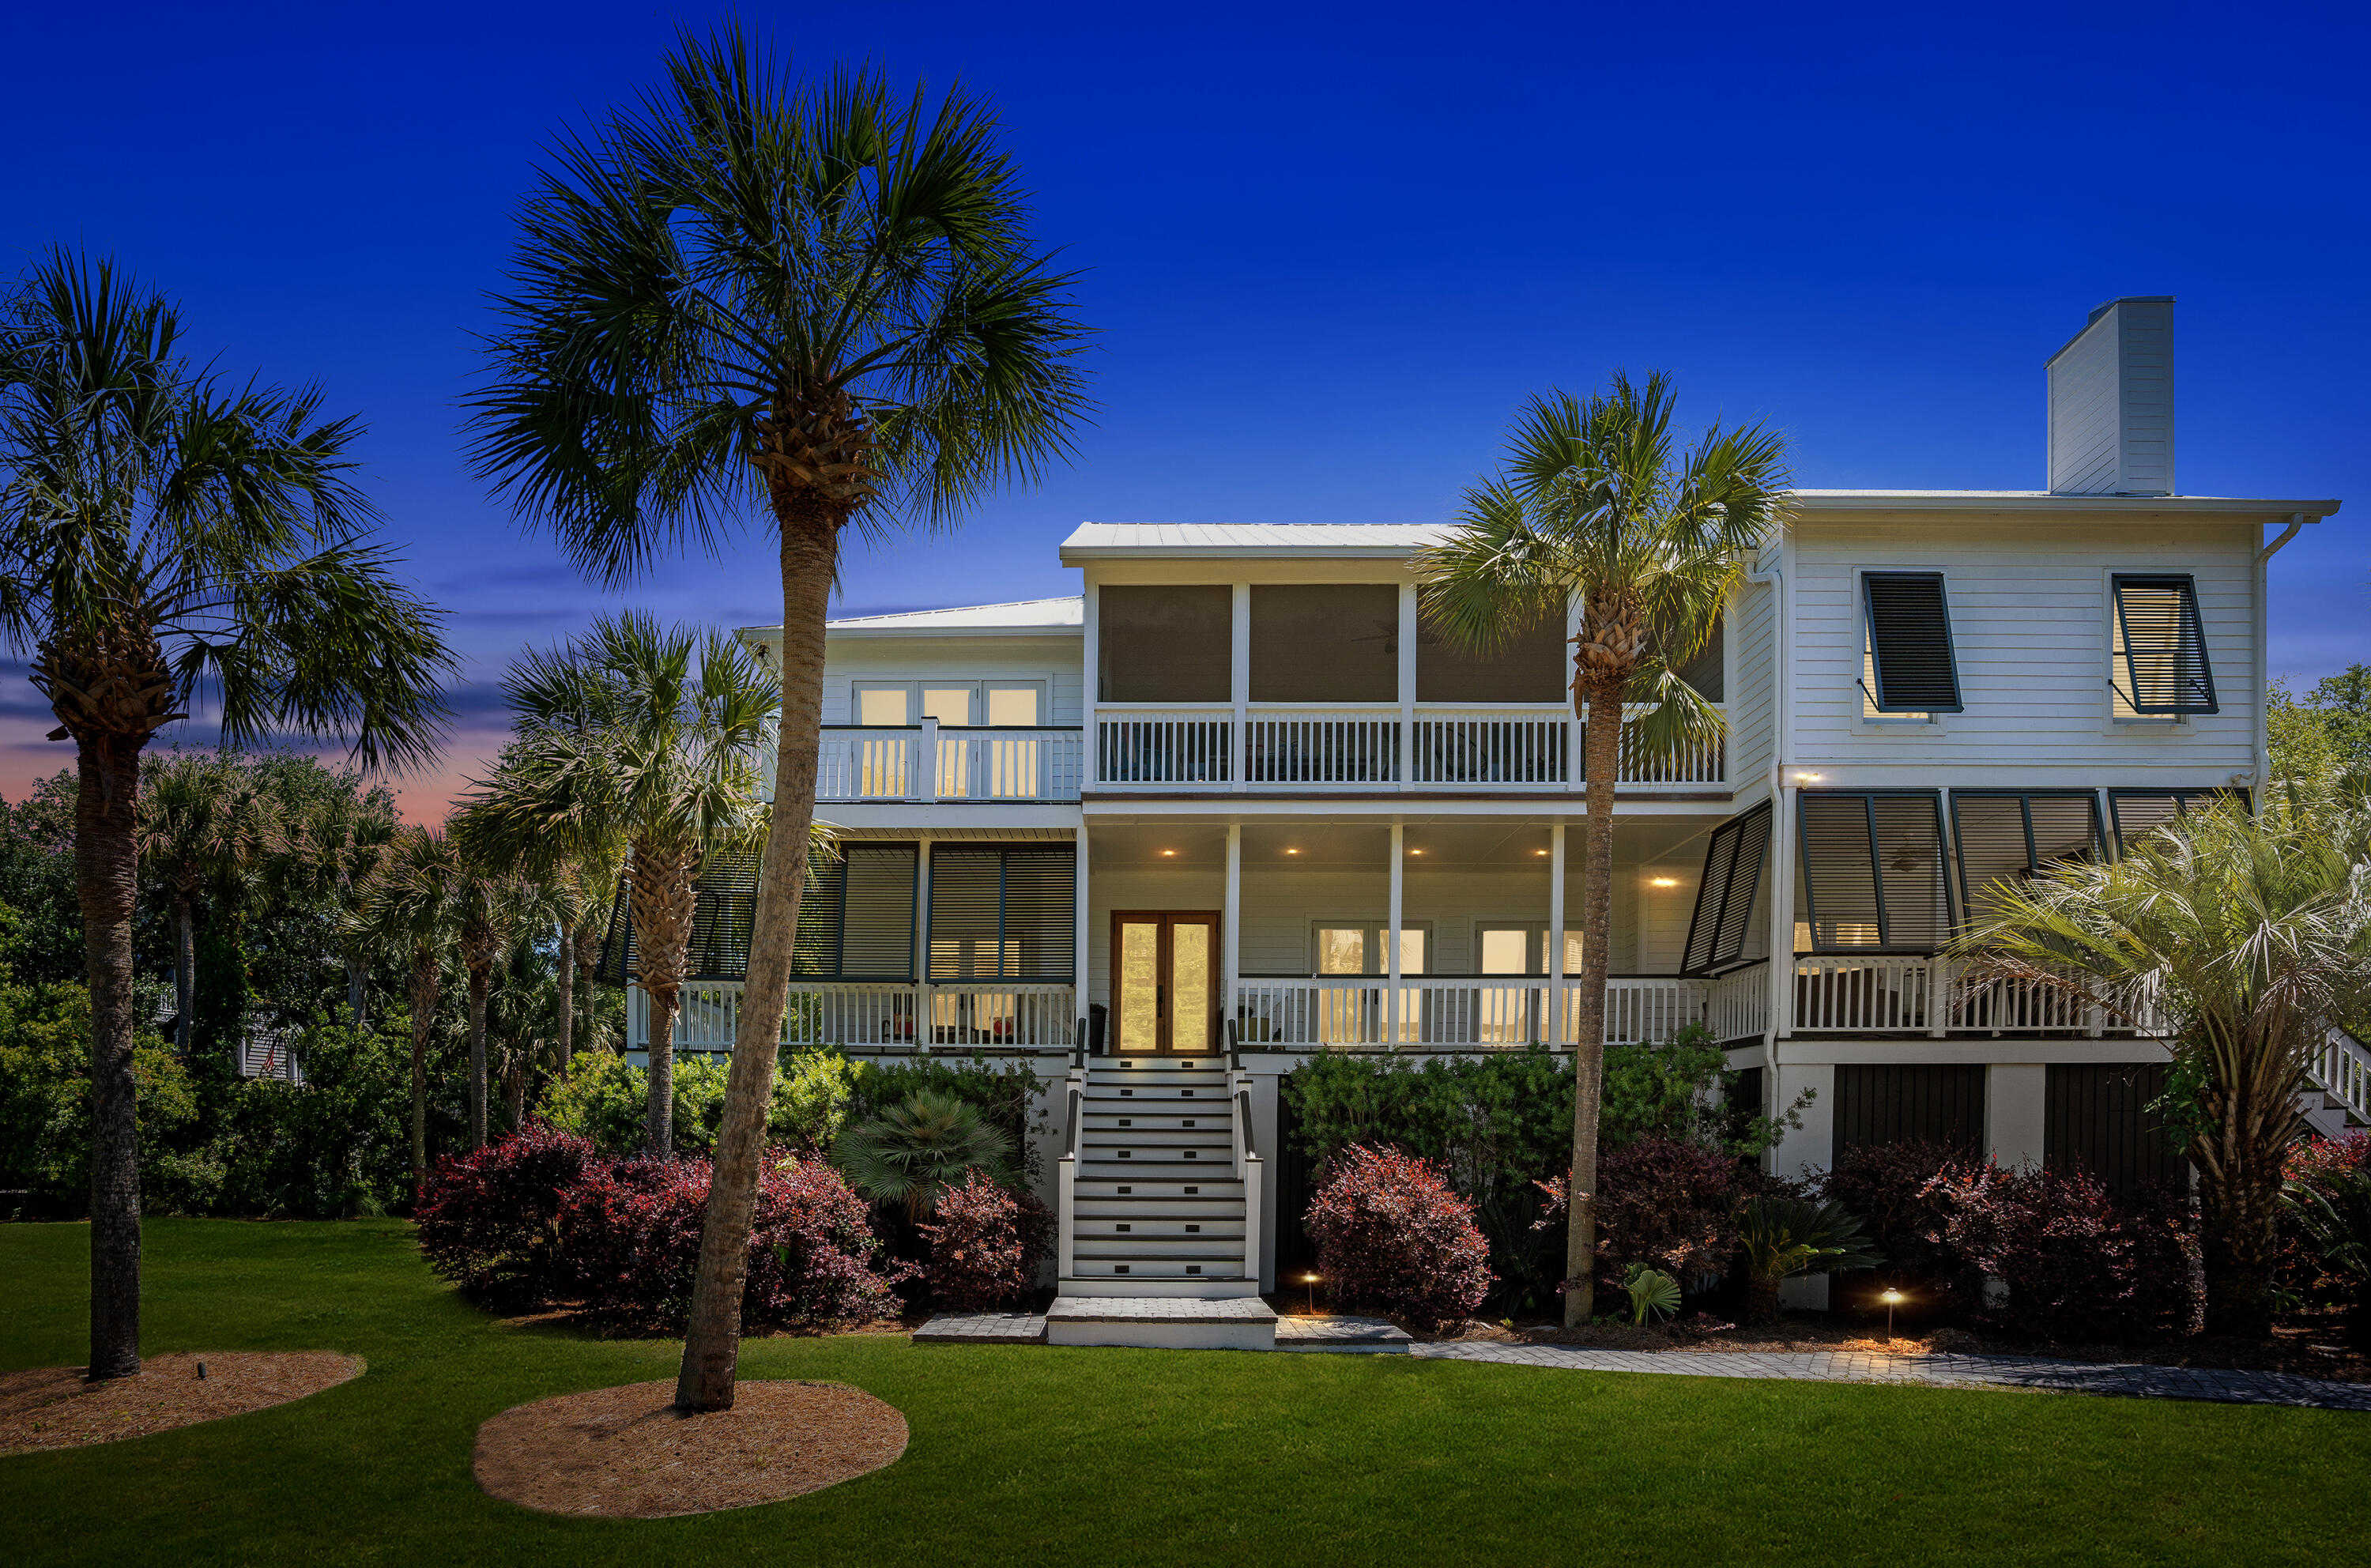 View Isle of Palms, SC 29451 house